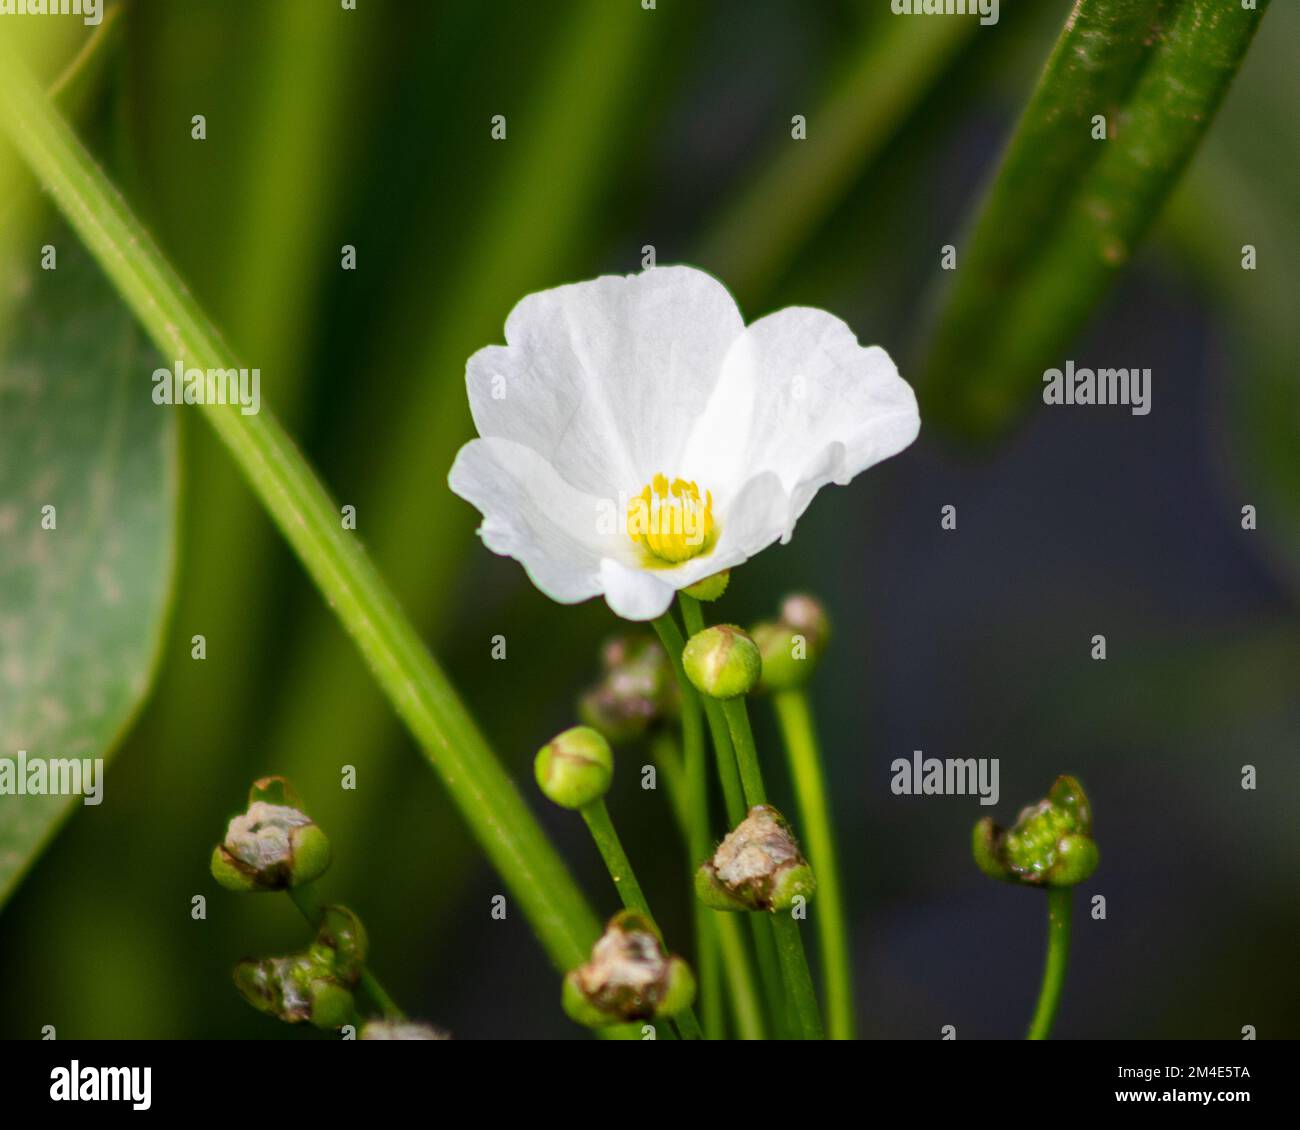 Flowering aquatic plant in Puchong City Park Stock Photo